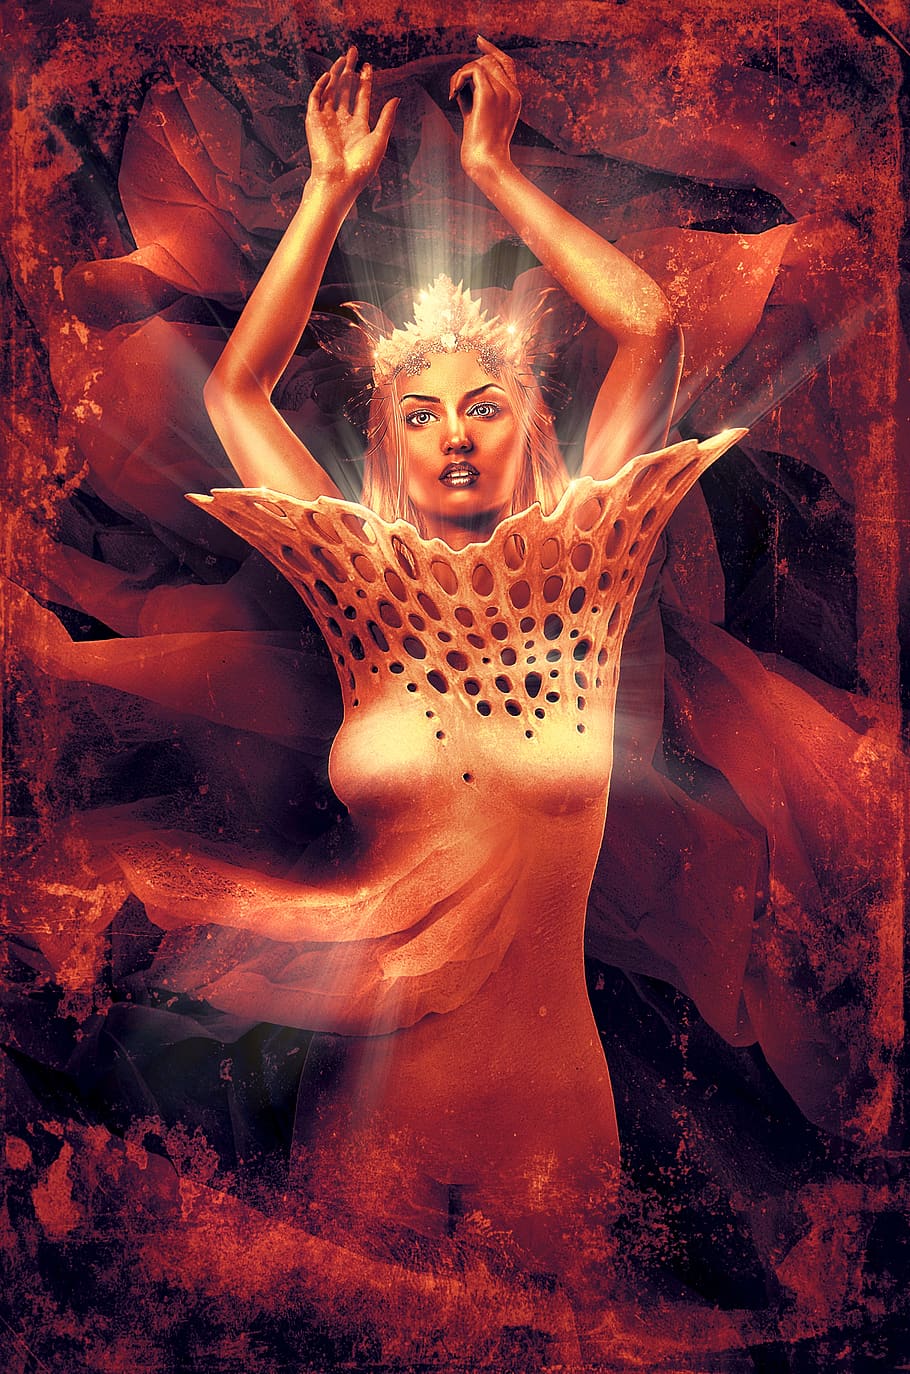 book cover, enlightenment, woman, body, red, light, composing, photomontage, shining, fantasy